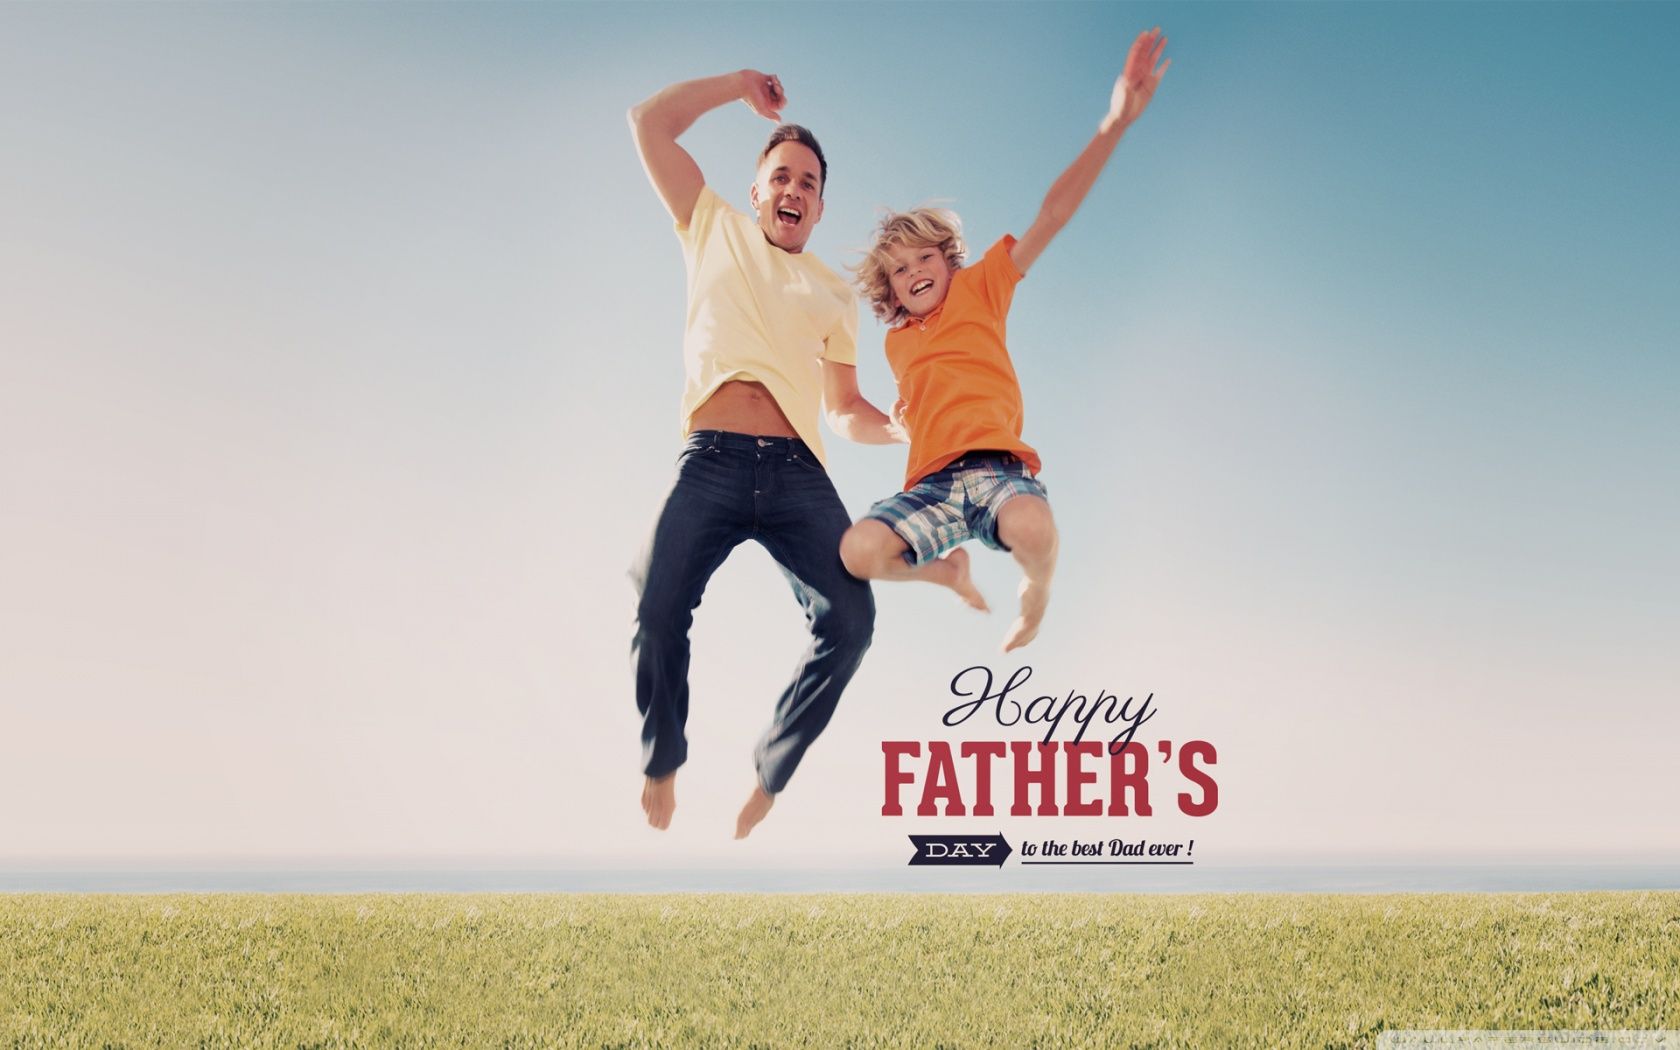 Fathers Day Ultra HD Desktop Background Wallpaper for 4K UHD TV, Tablet